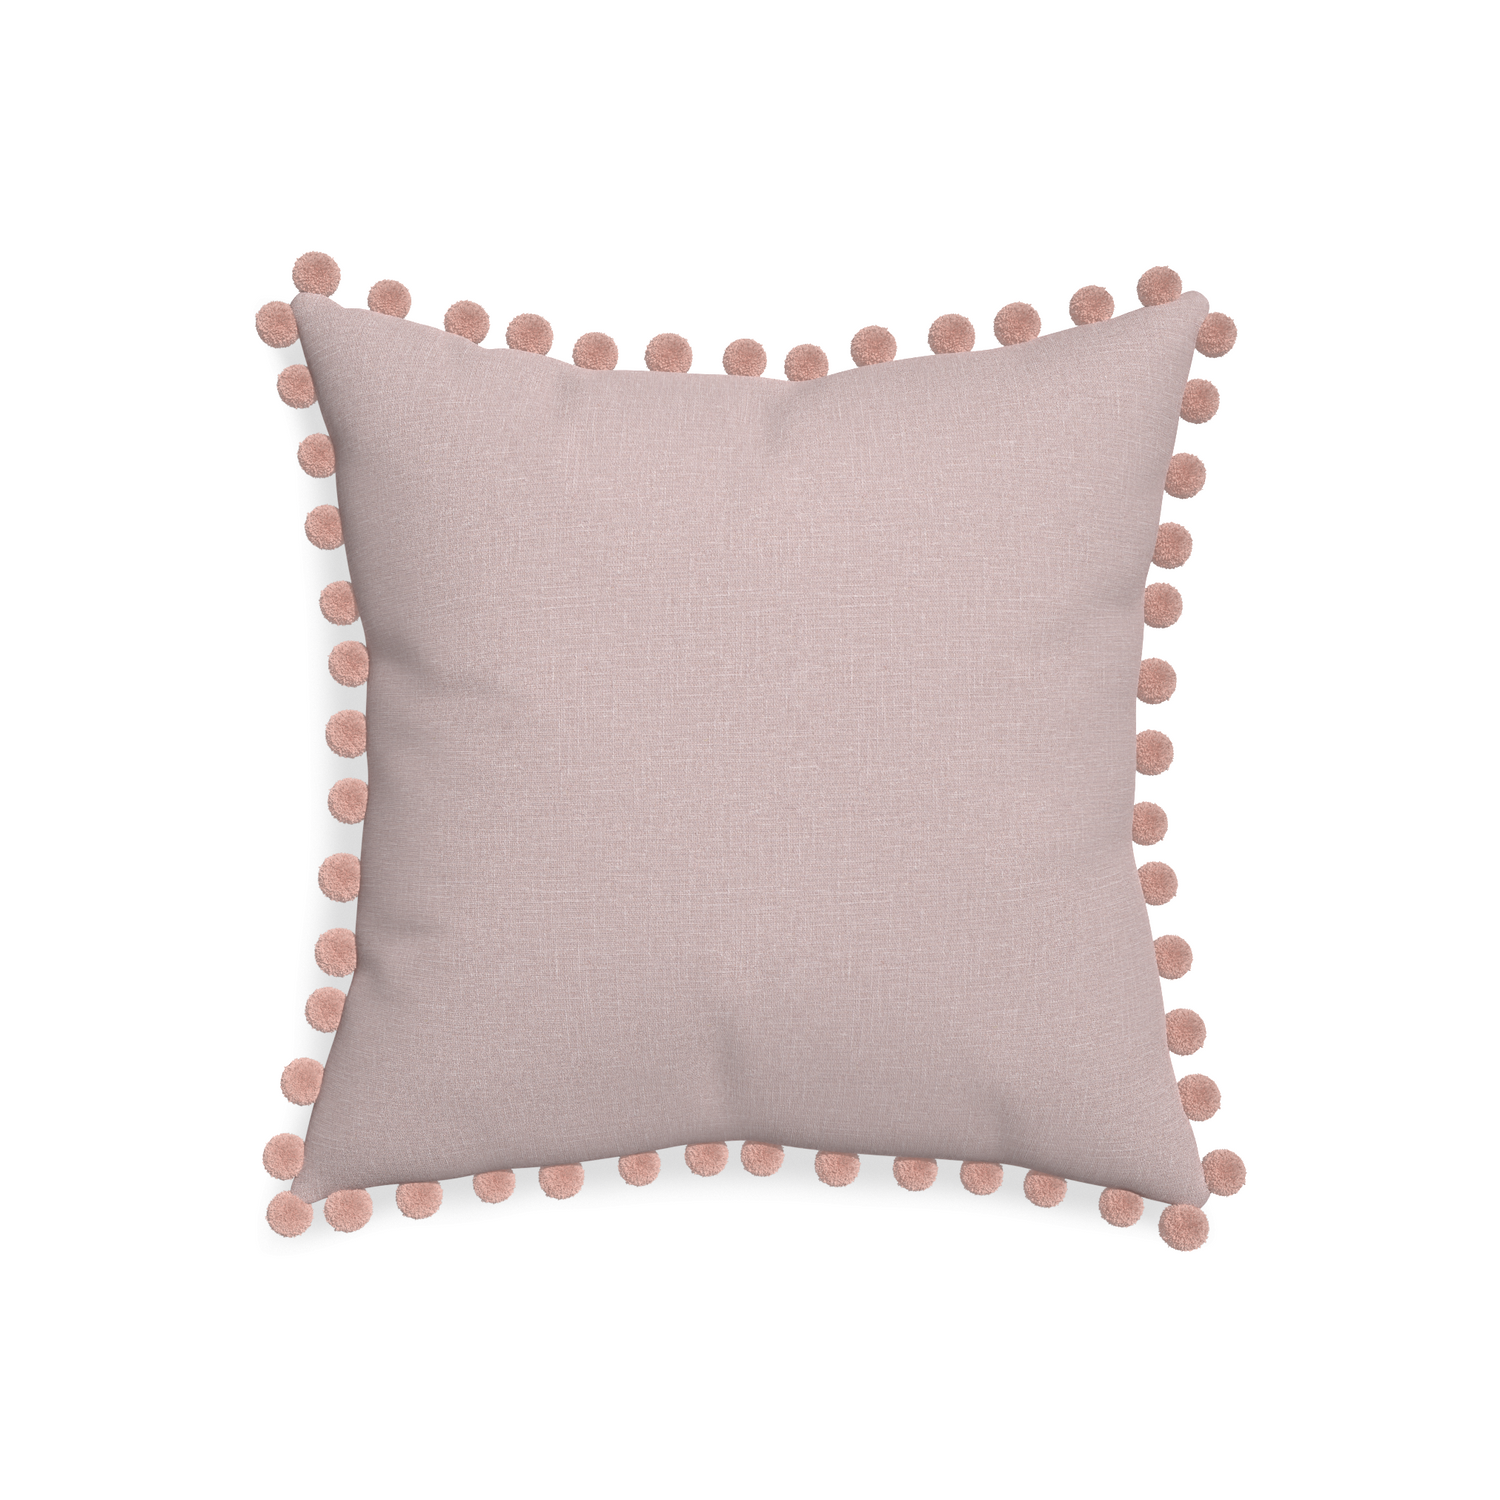 20-square orchid custom mauve pinkpillow with rose pom pom on white background